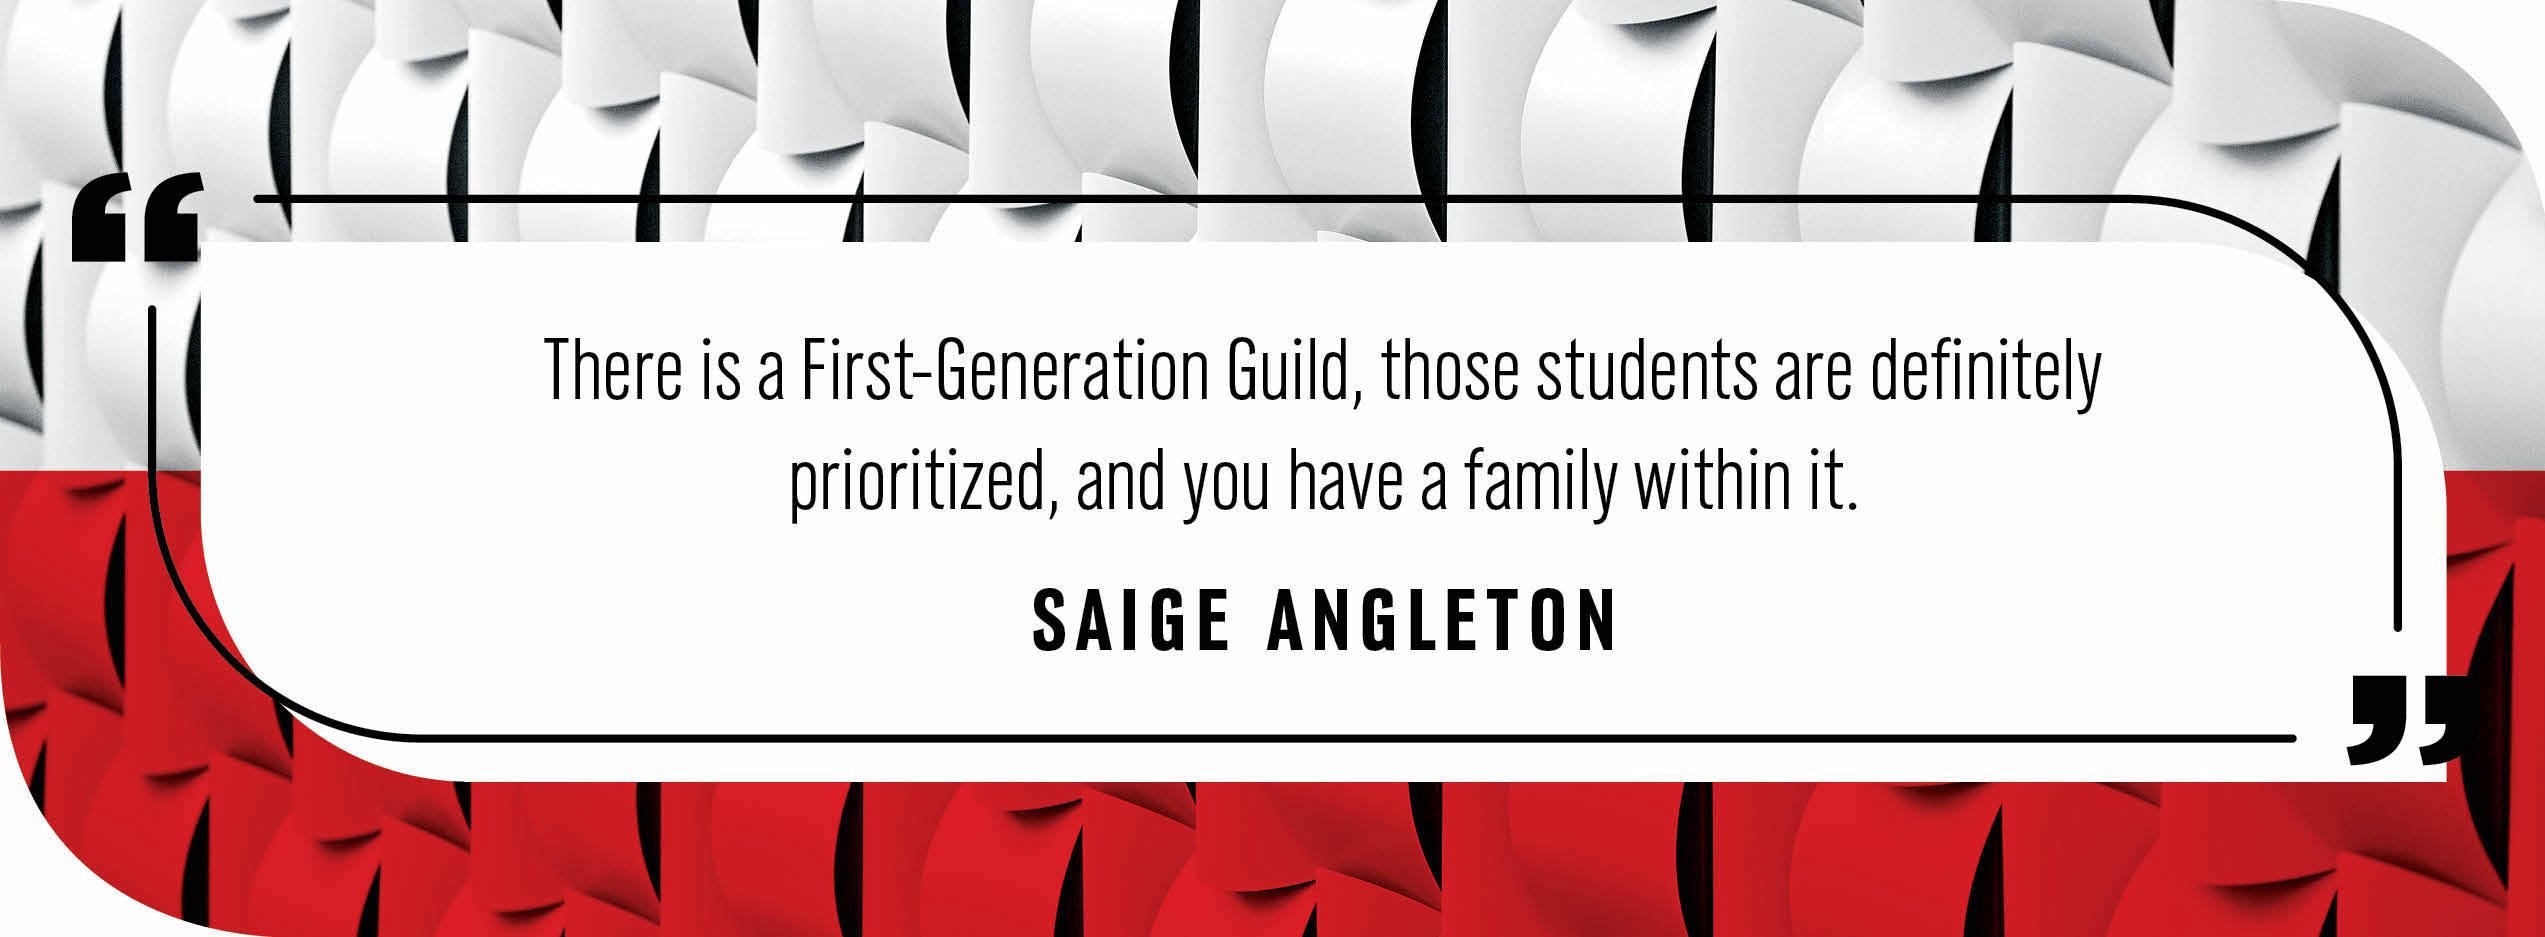 Quote by Saige Angleton: "There is a First-Generation Guild, those students are definitely prioritized, and you have a family within it."